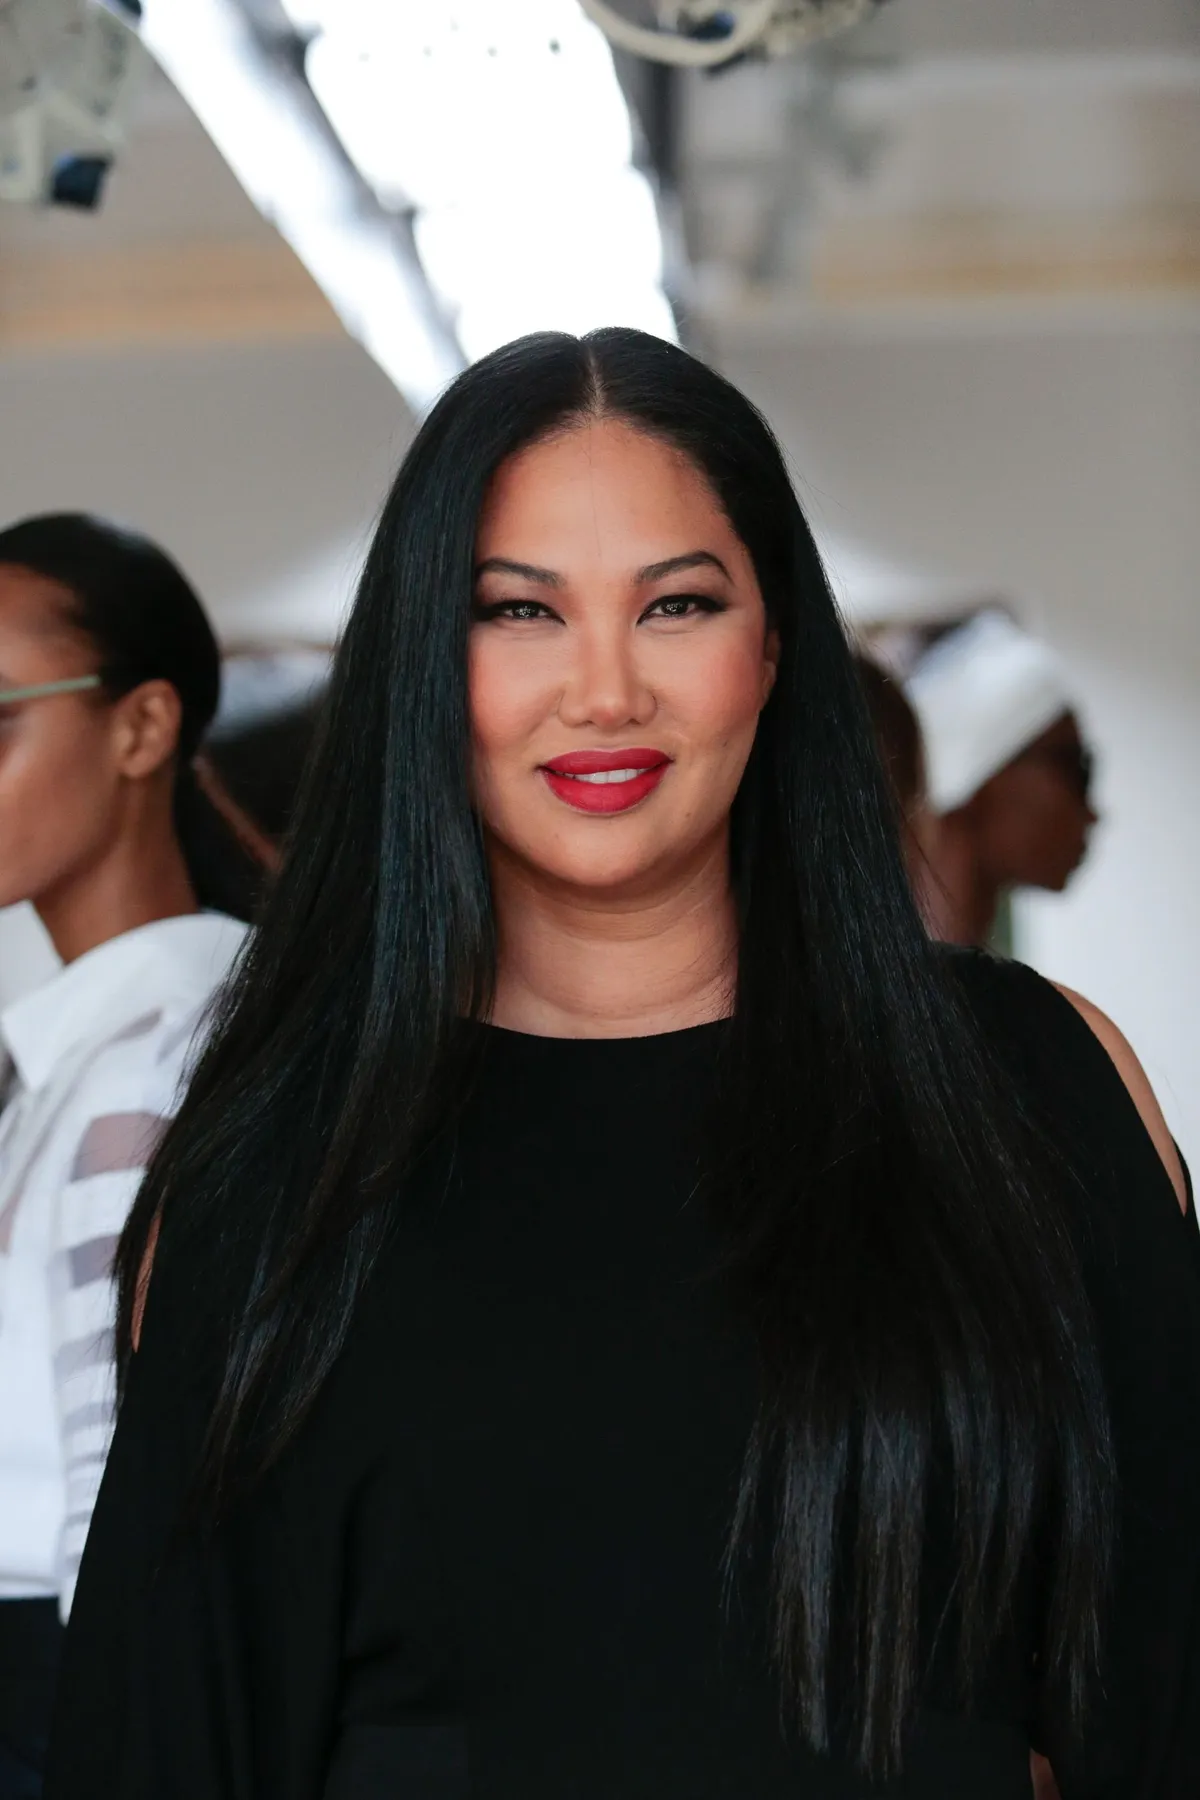 Kimora Lee Simmons during New York Fashion Week at The Gallery, Skylight at Clarkson Squrare on September 14, 2016 | Photo: Getty Images